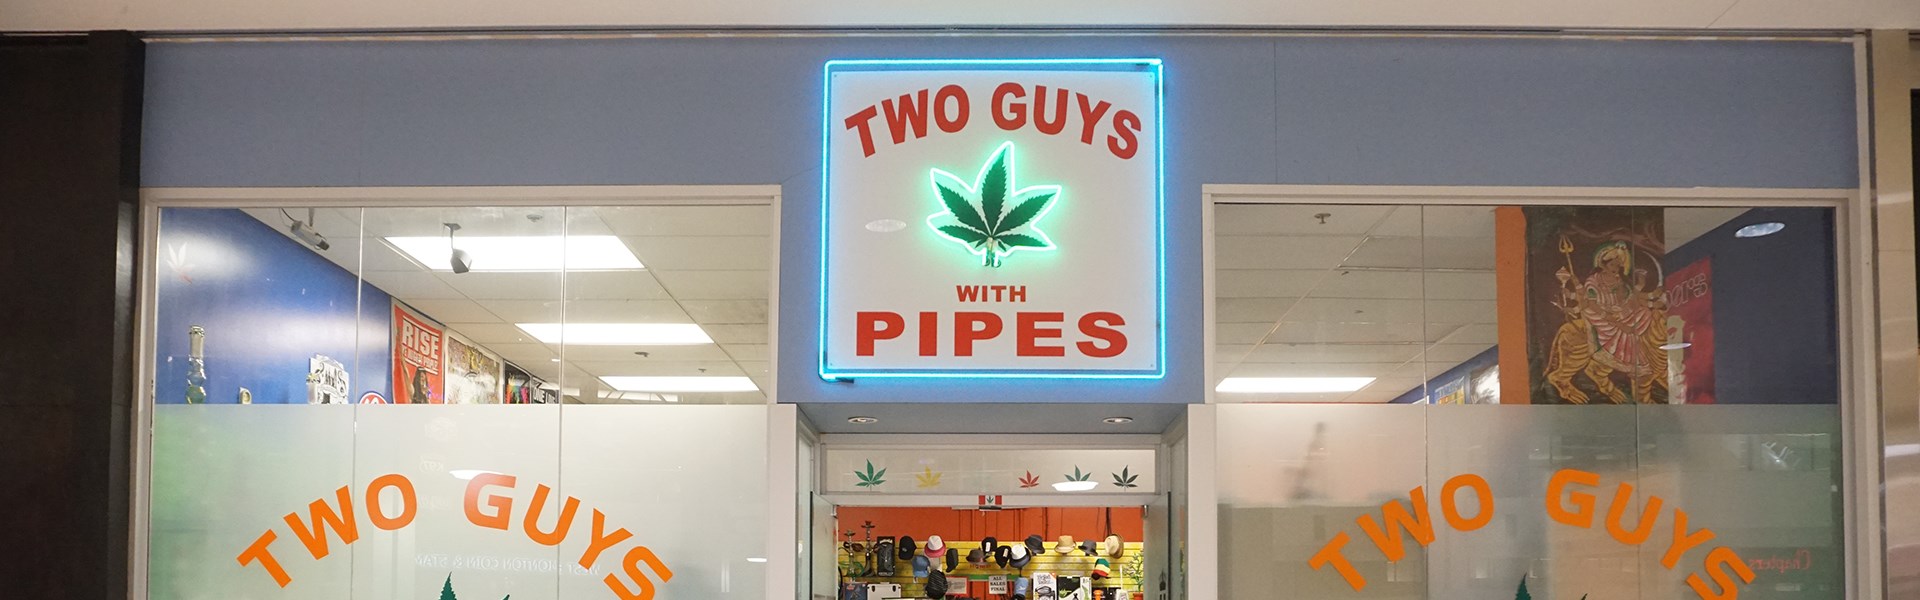 Two Guys With Pipes